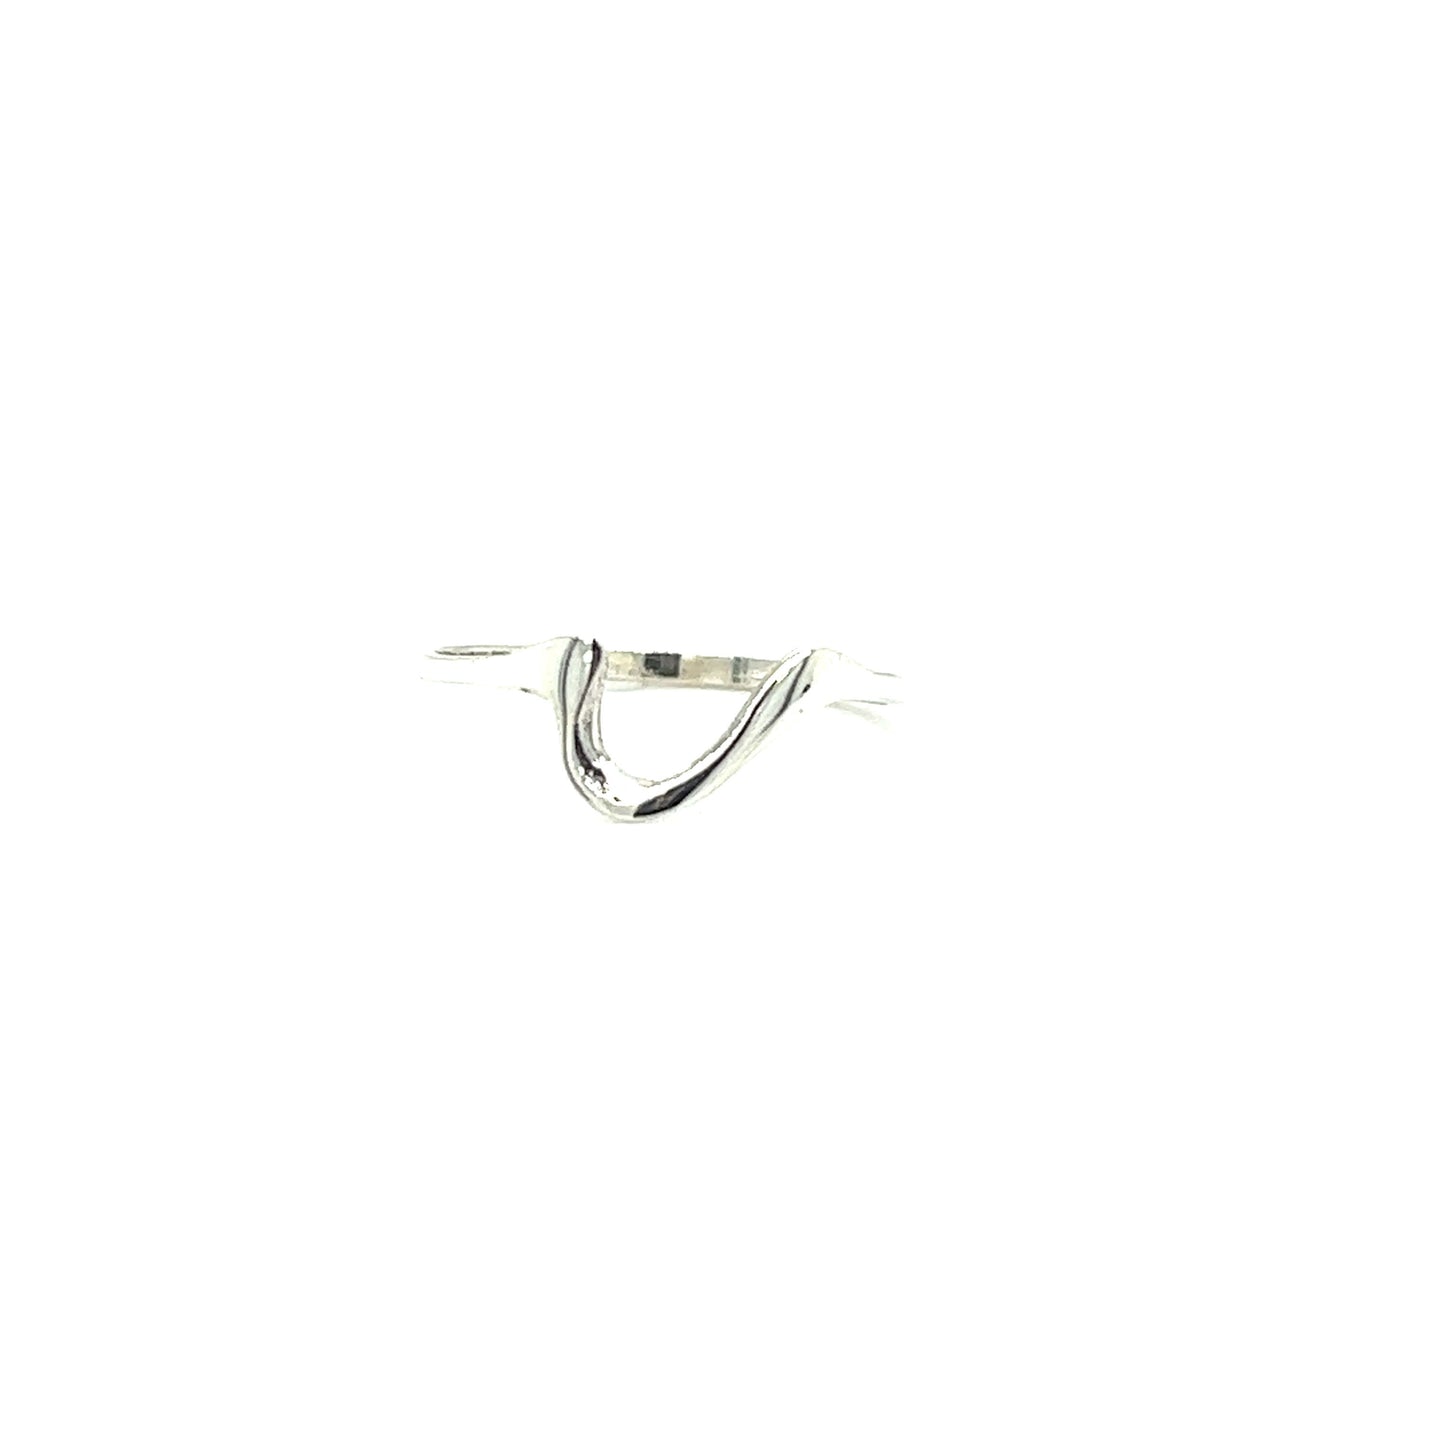 
                  
                    A petite size Dainty Squiggle Ring from Super Silver with a whimsical squiggle design, photographed on a white background.
                  
                